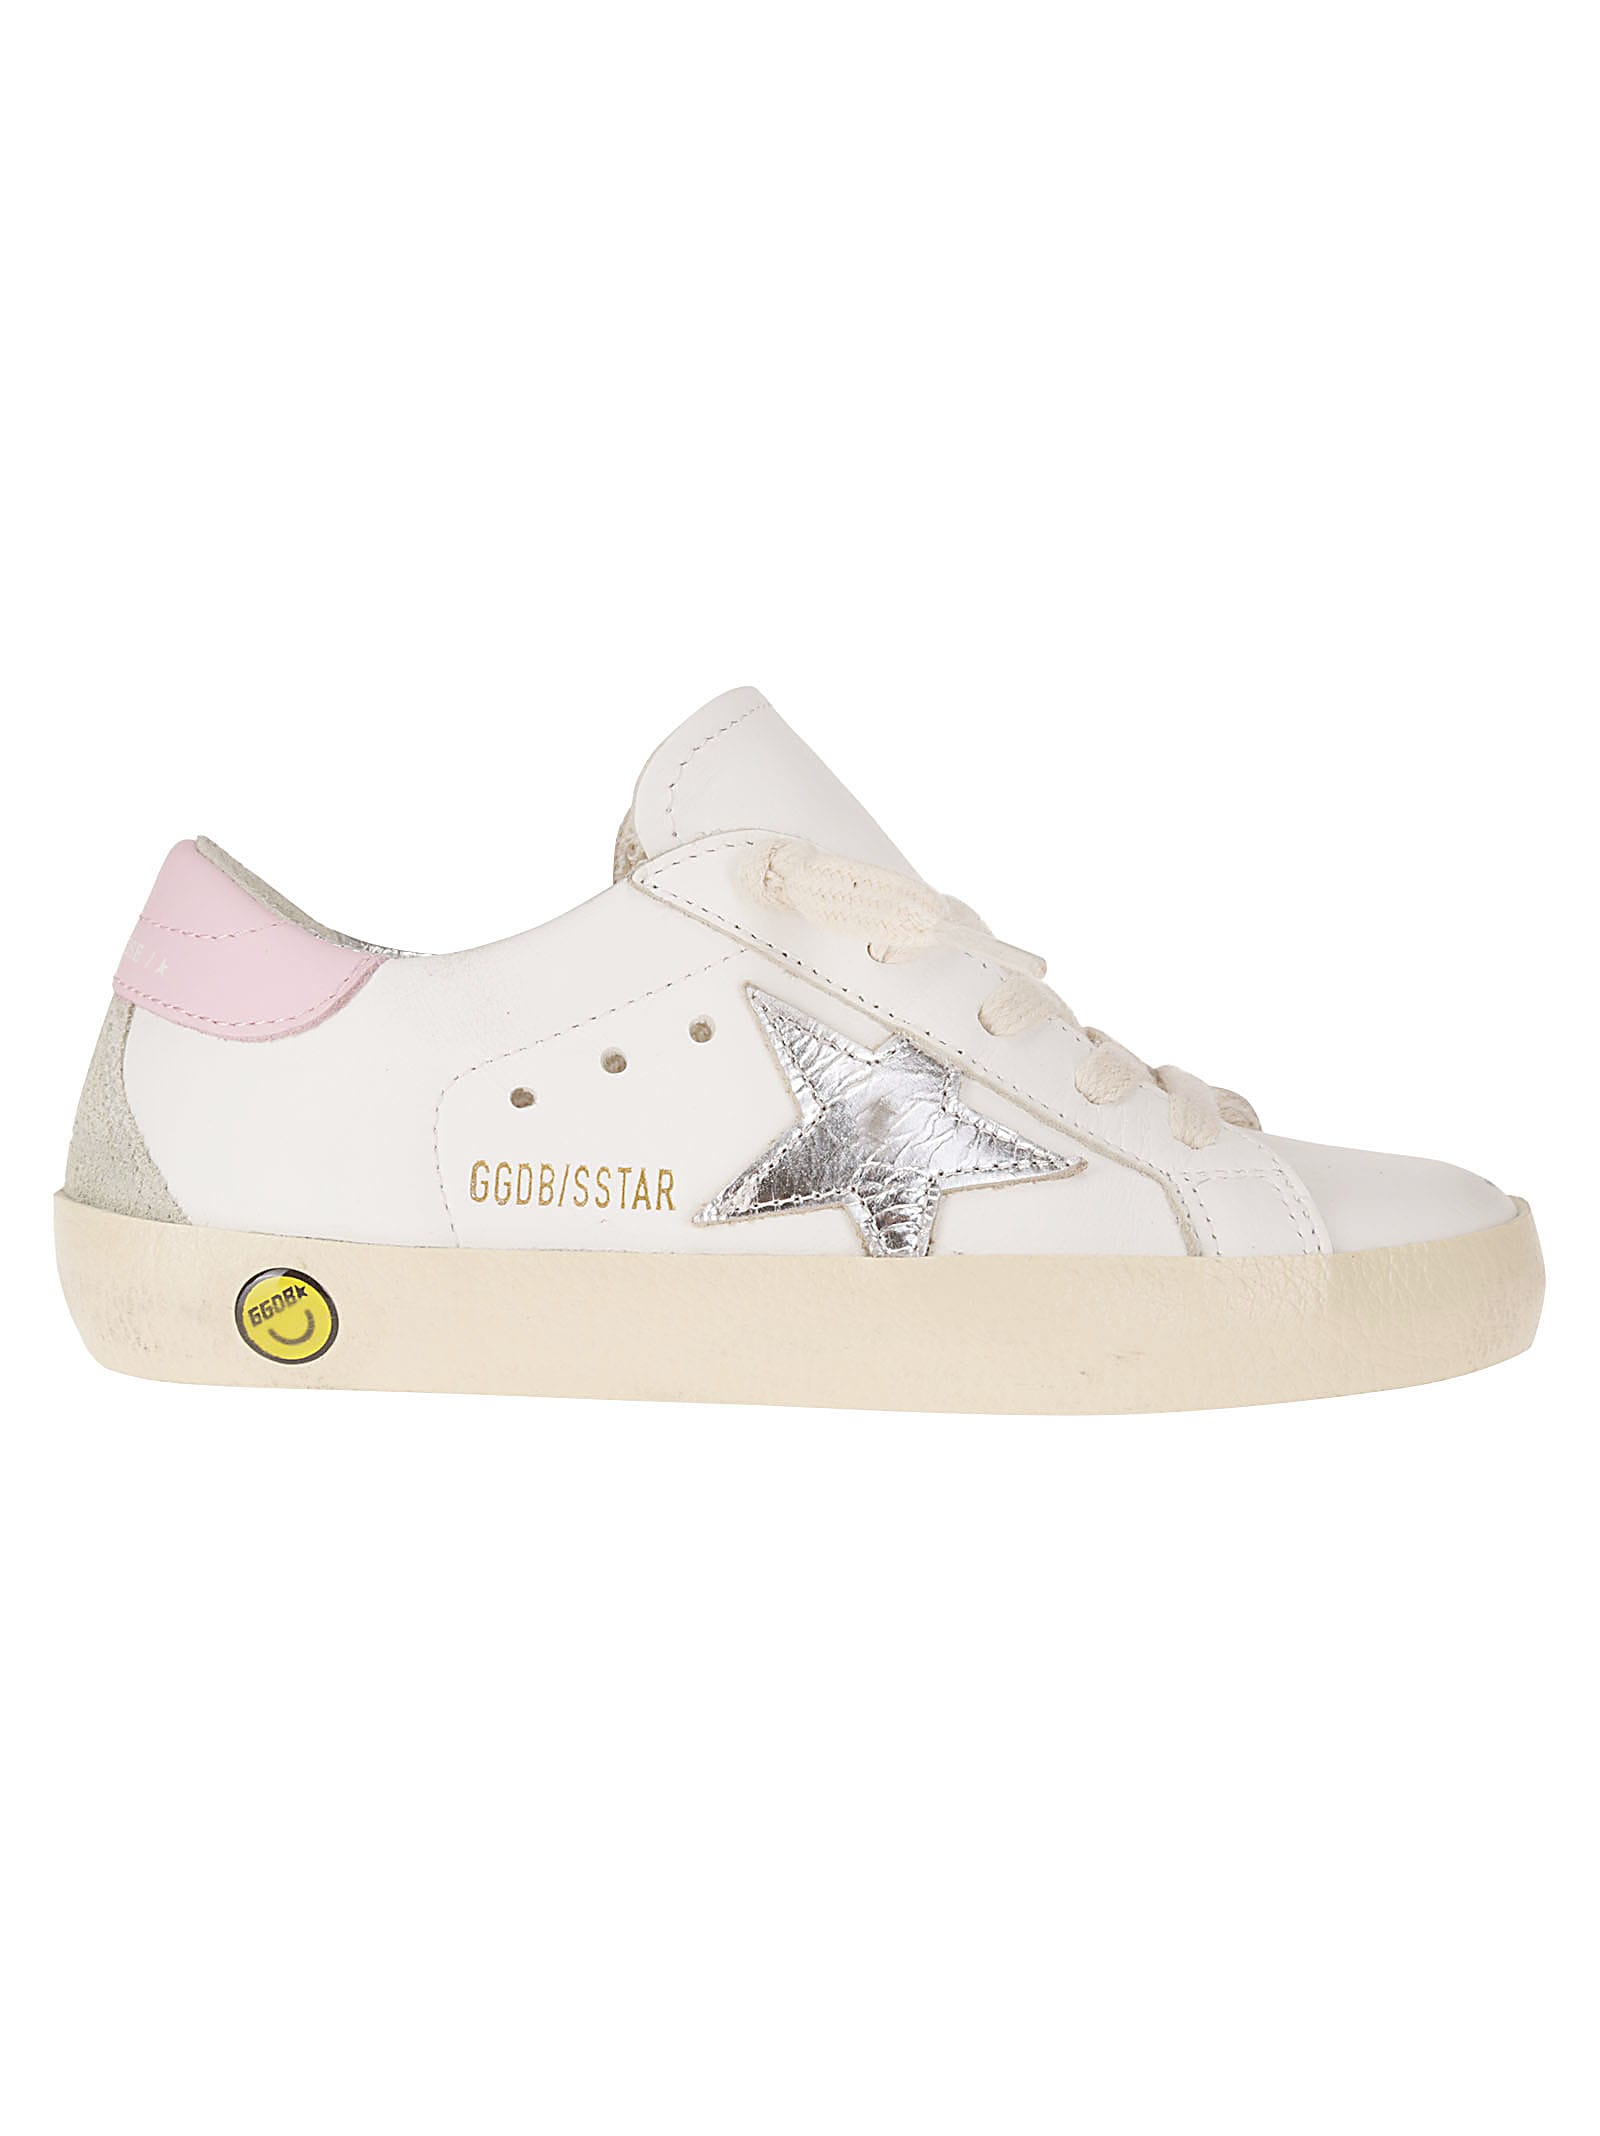 Golden Goose Kids' Super-star Leather Upper And Heel Laminated Sta In White/silver/ice/orchid Pink